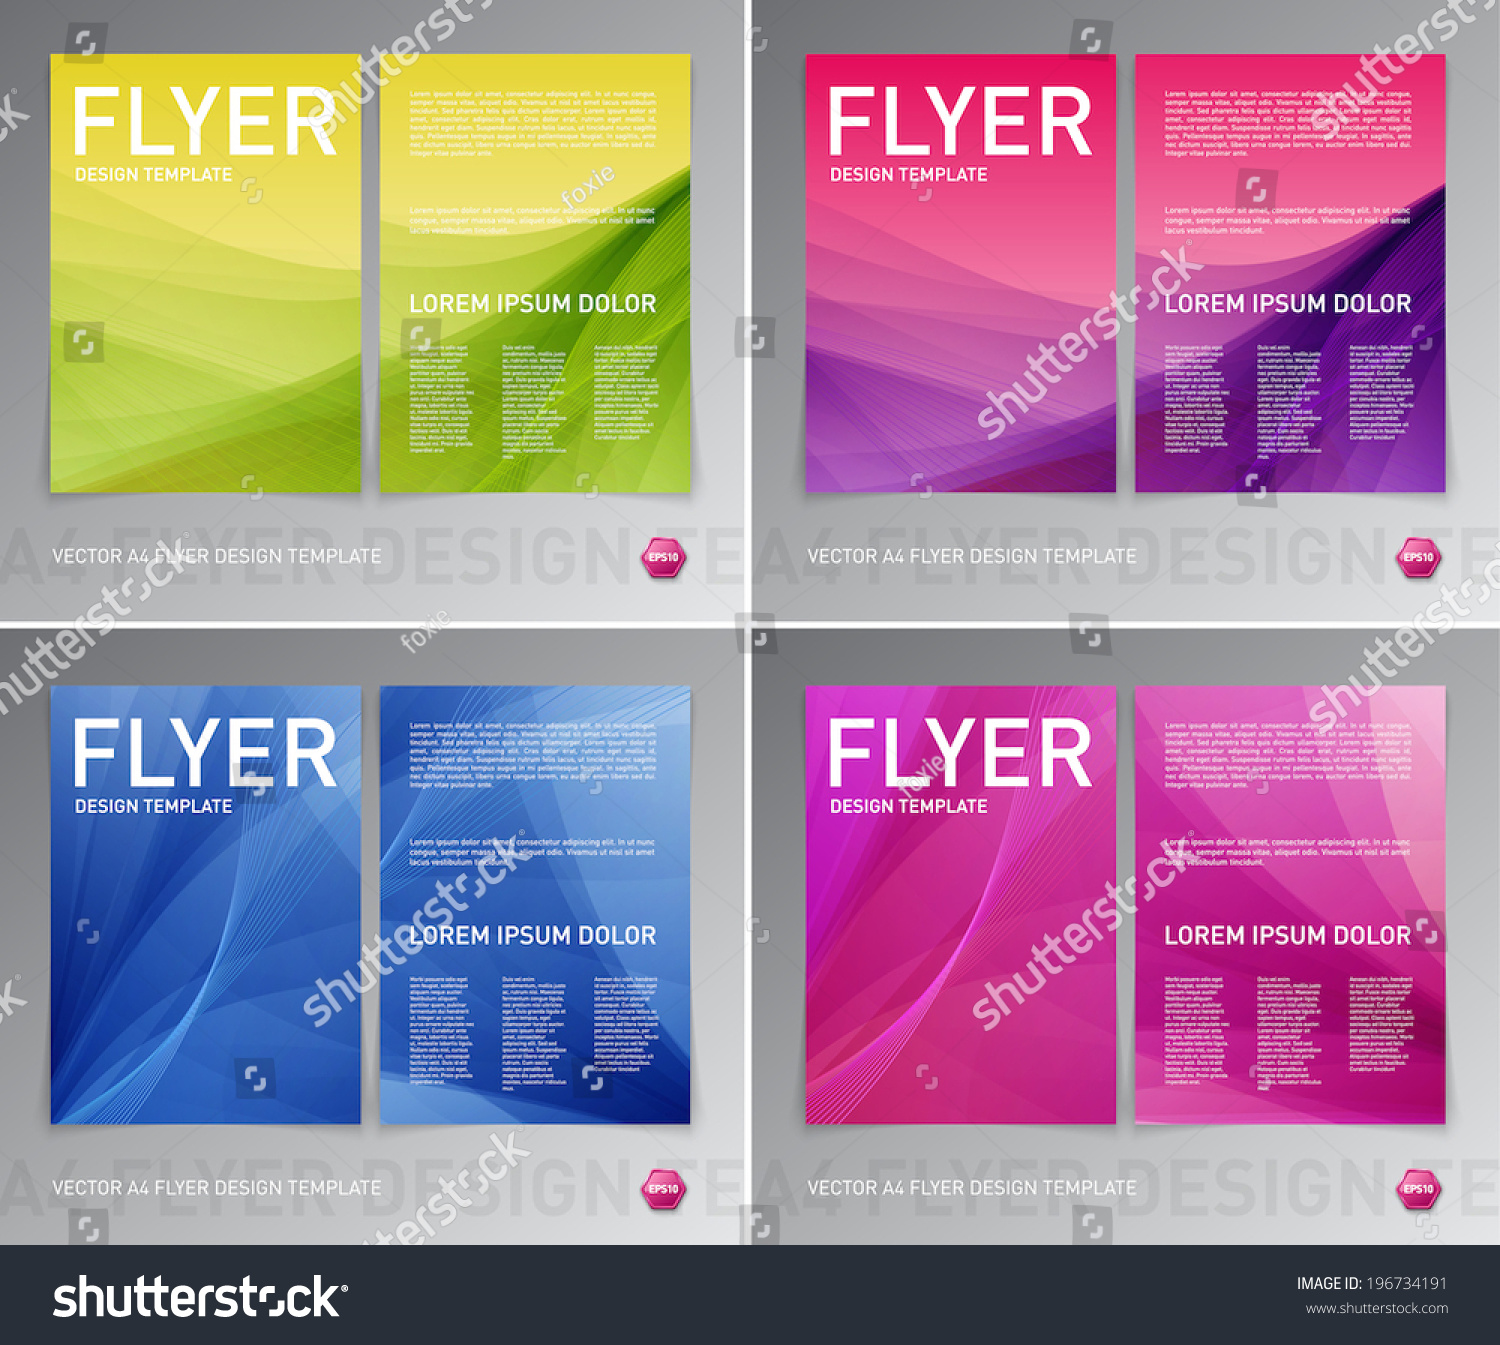 Abstract Vector Modern Flyer Brochure Design Templates Collection Smooth Colorful Backgrounds